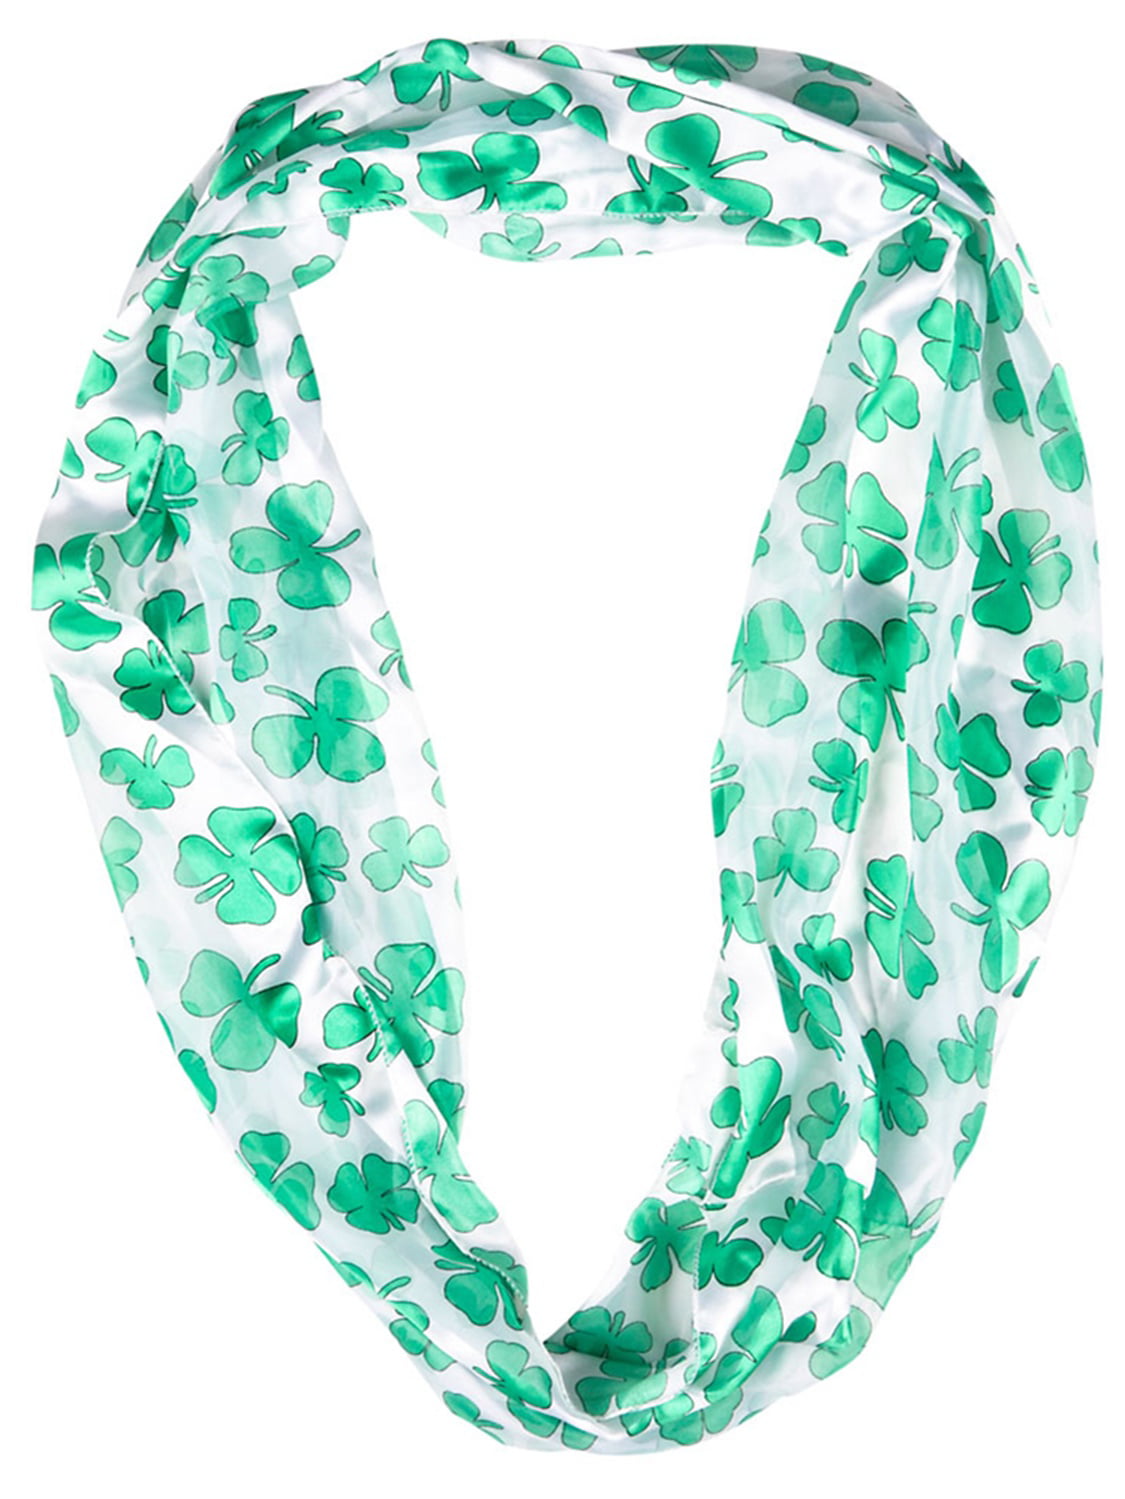 St. Patrick's Day/Green Upcycled Infinity Scarf